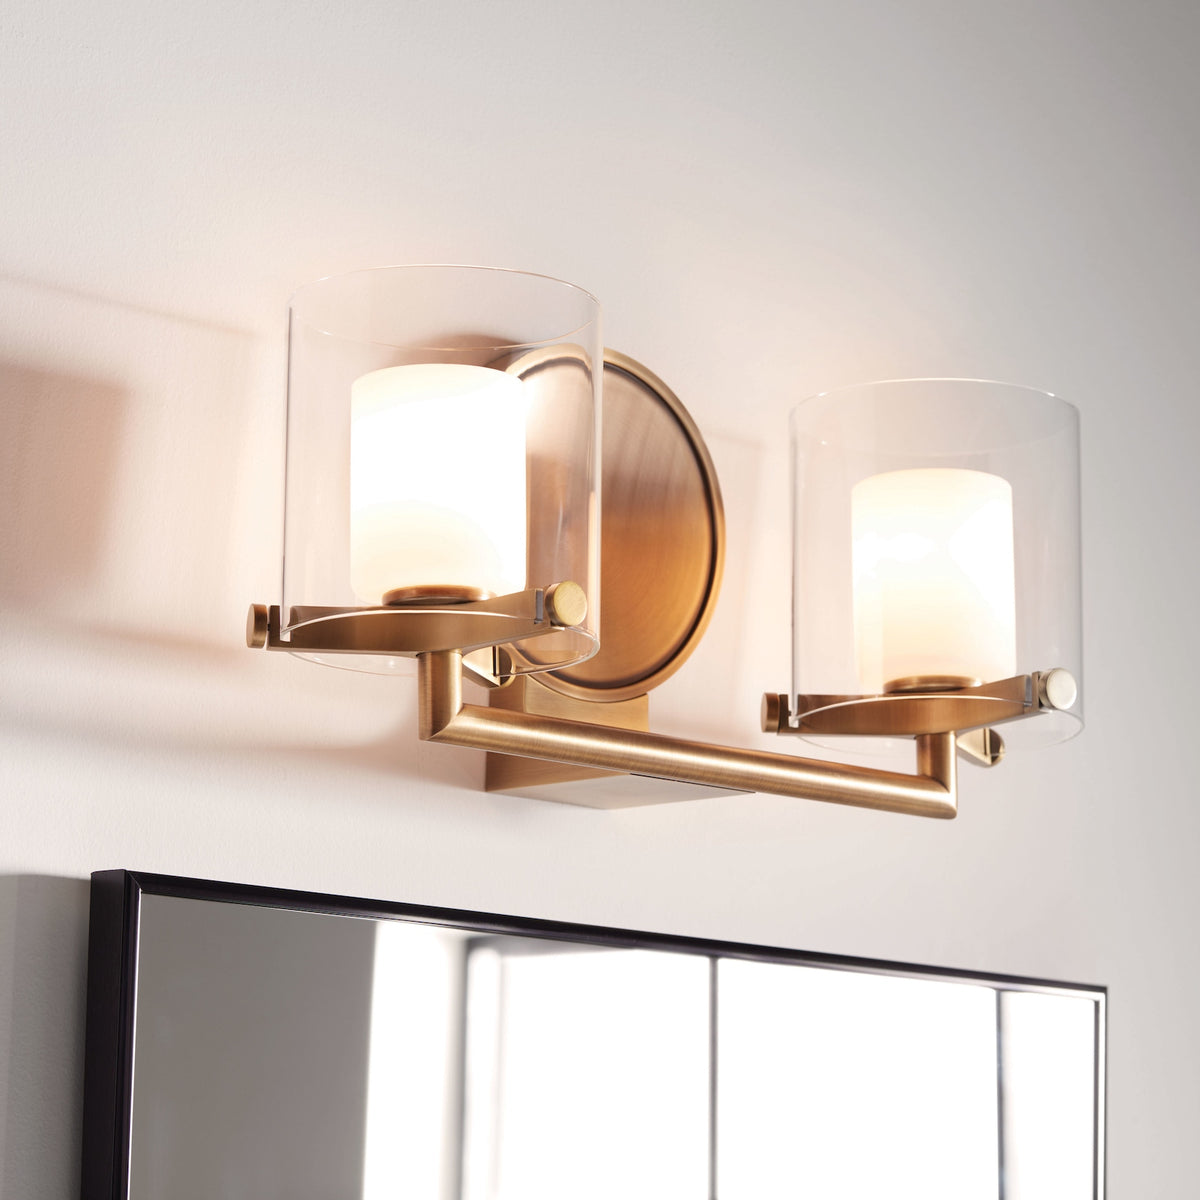 Hinkley Rixon Vanity Wall Sconce Collection